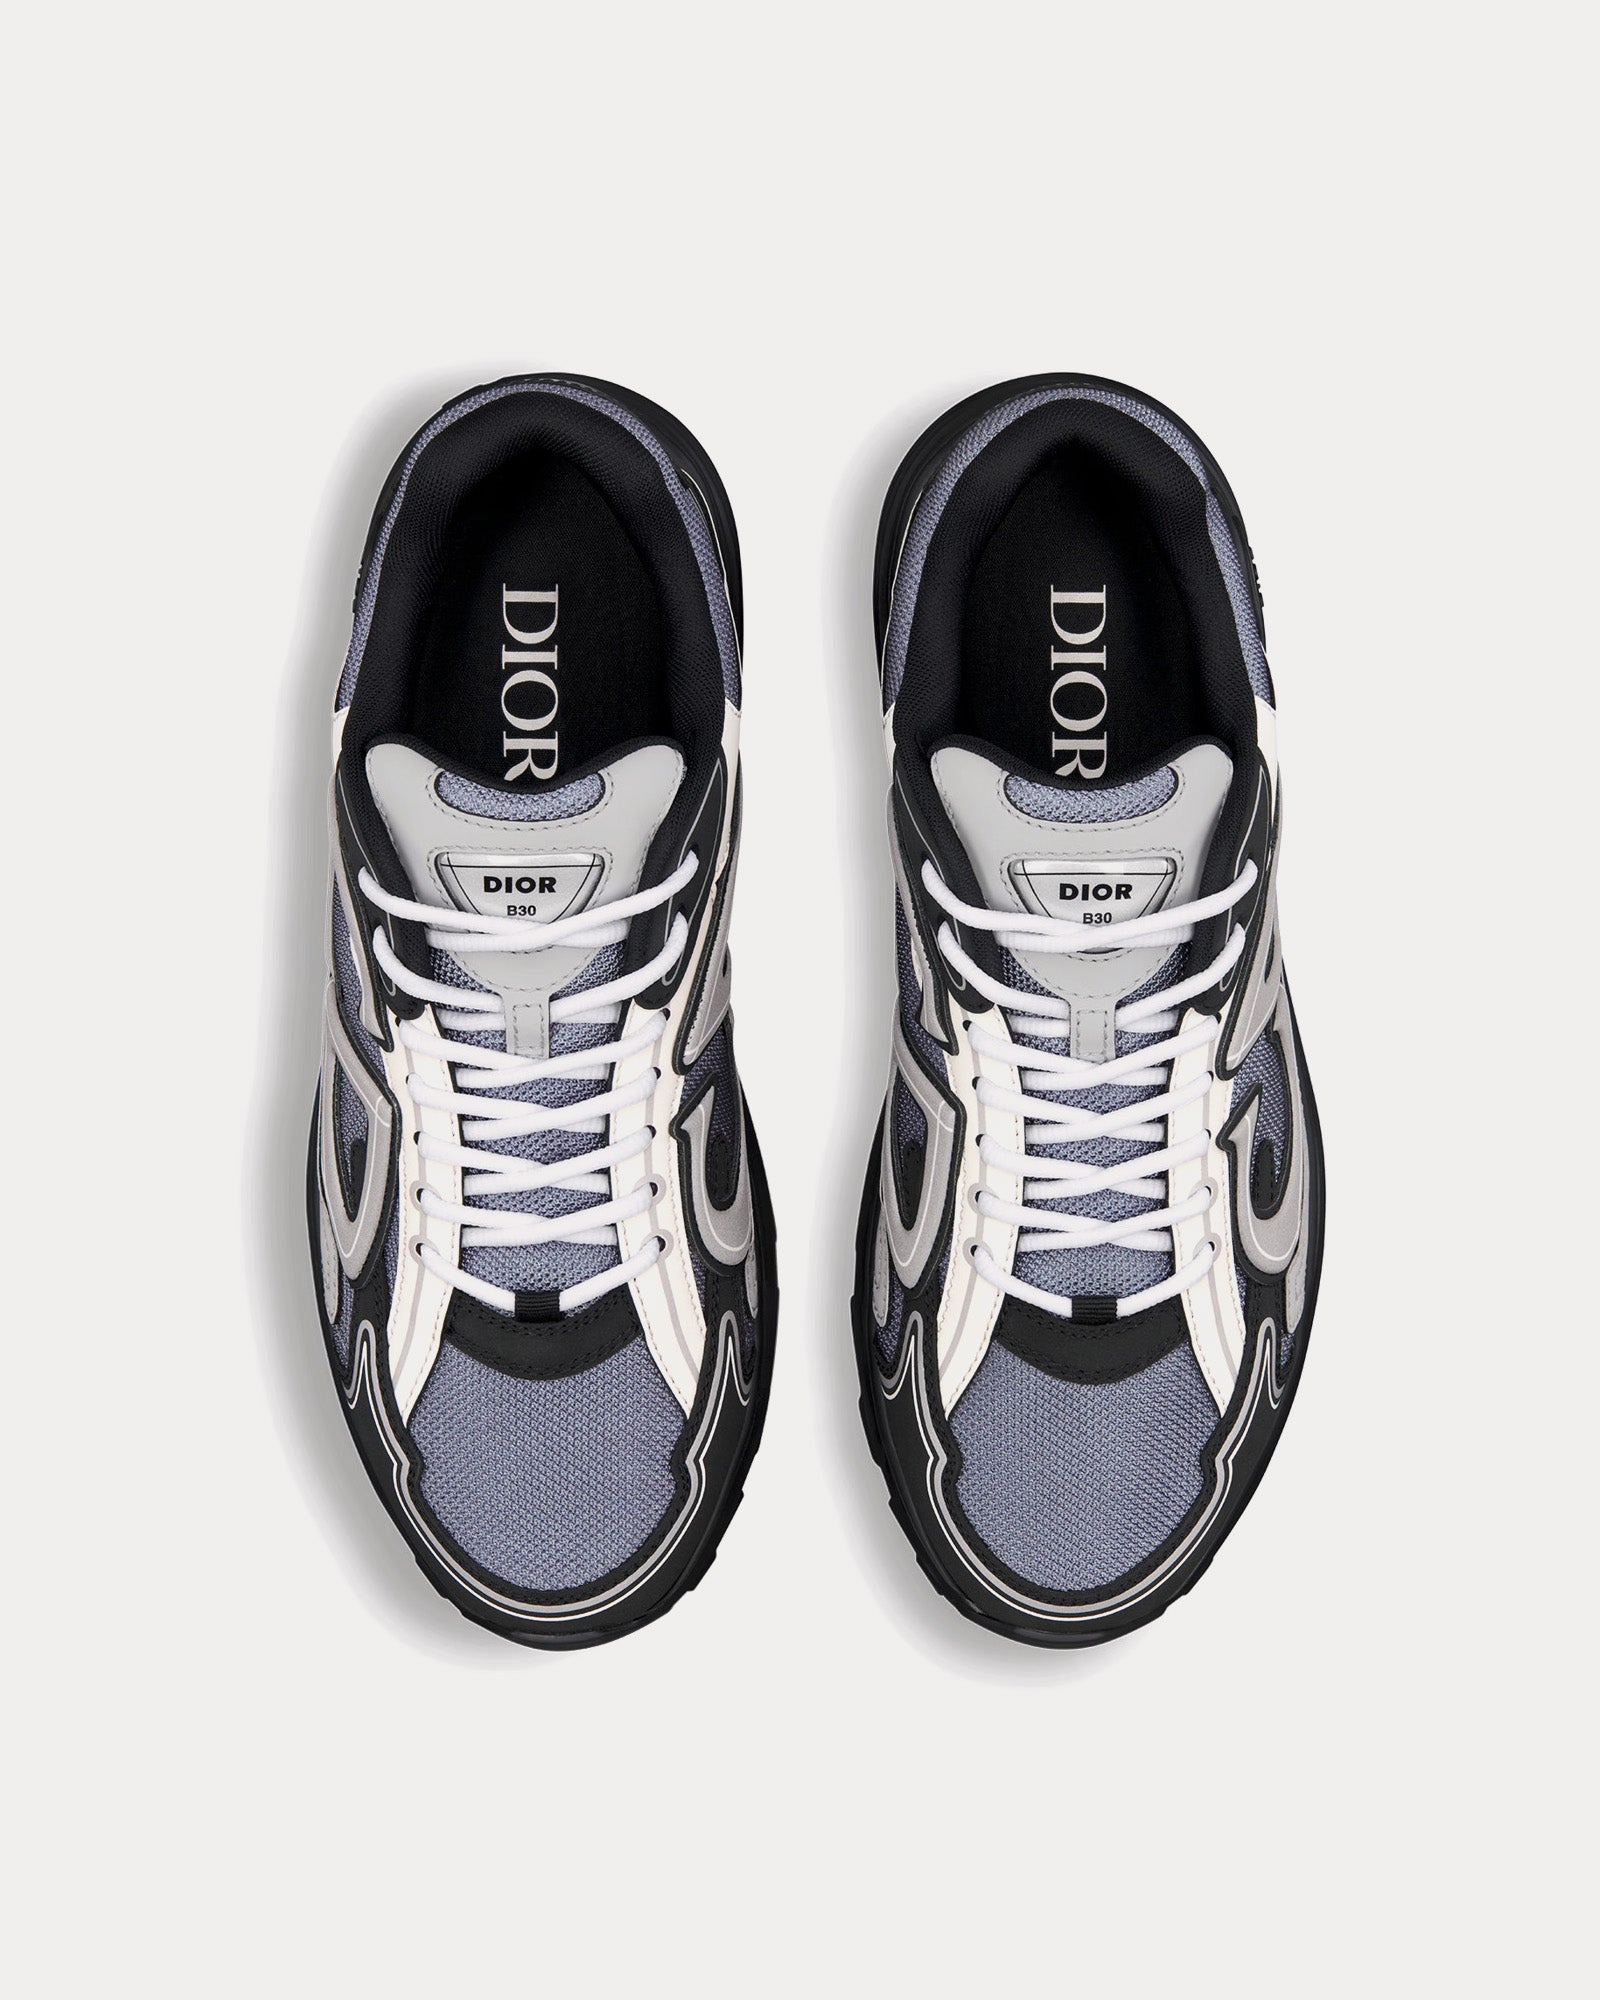 Dior - B30 Mesh & Technical Fabric Blue / Gray / White / Black Low Top Sneakers